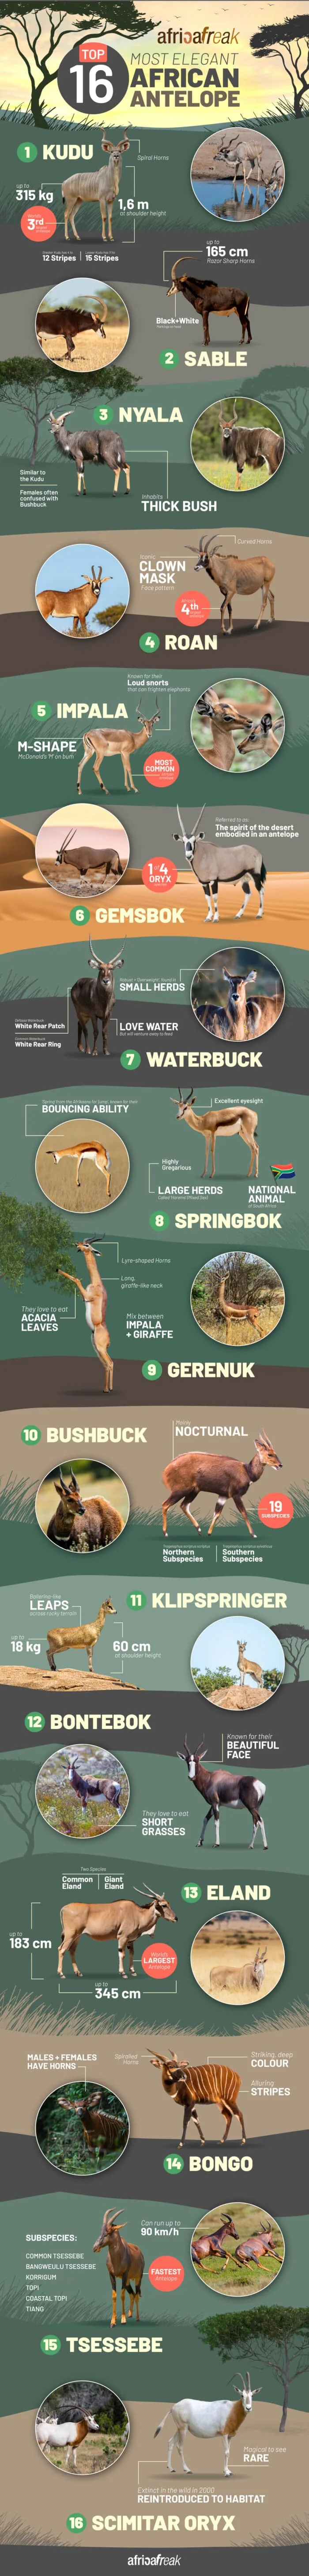 Colourful infographic about the most elegant African antelope